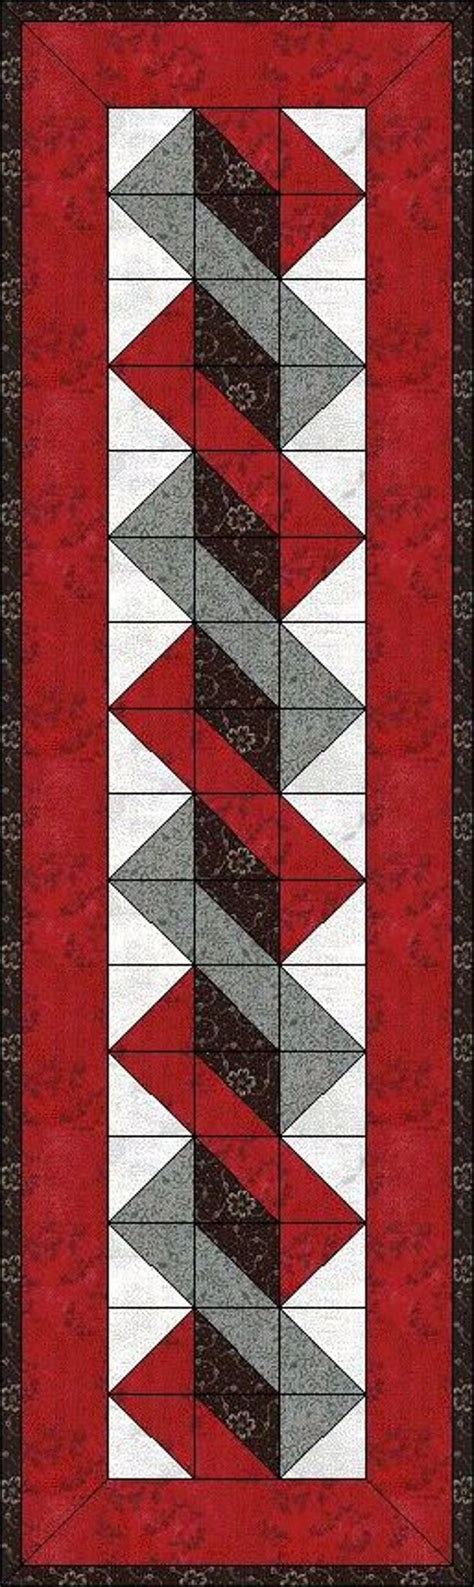 a red and grey quilt with black border